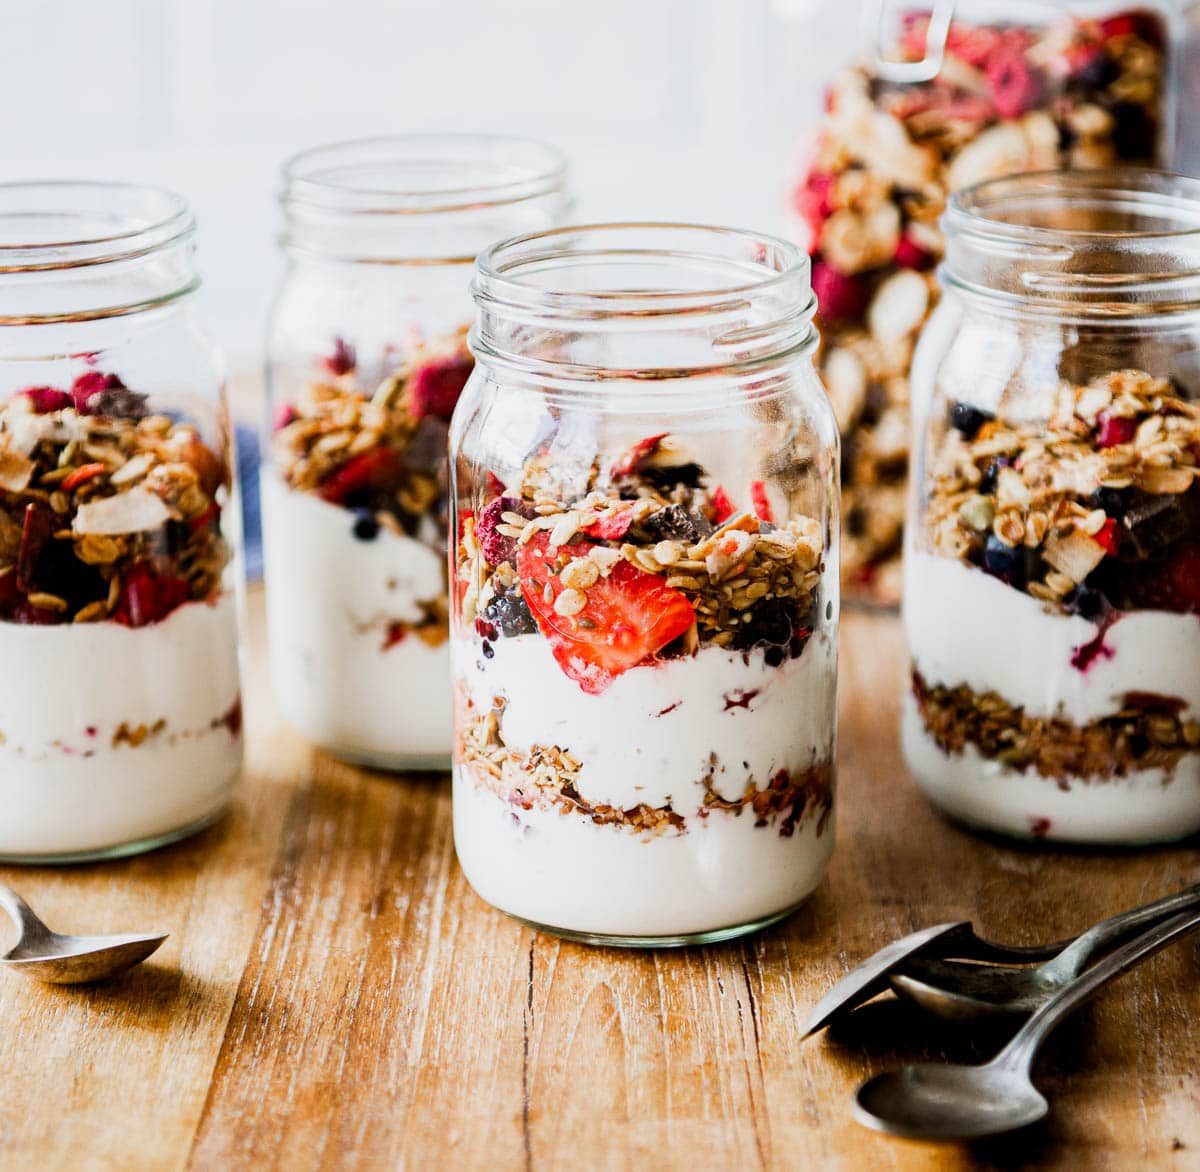 several glass jars of plant based yogurt mixed with granola and fresh berries on a wooden table top, next to a pile of spoons.